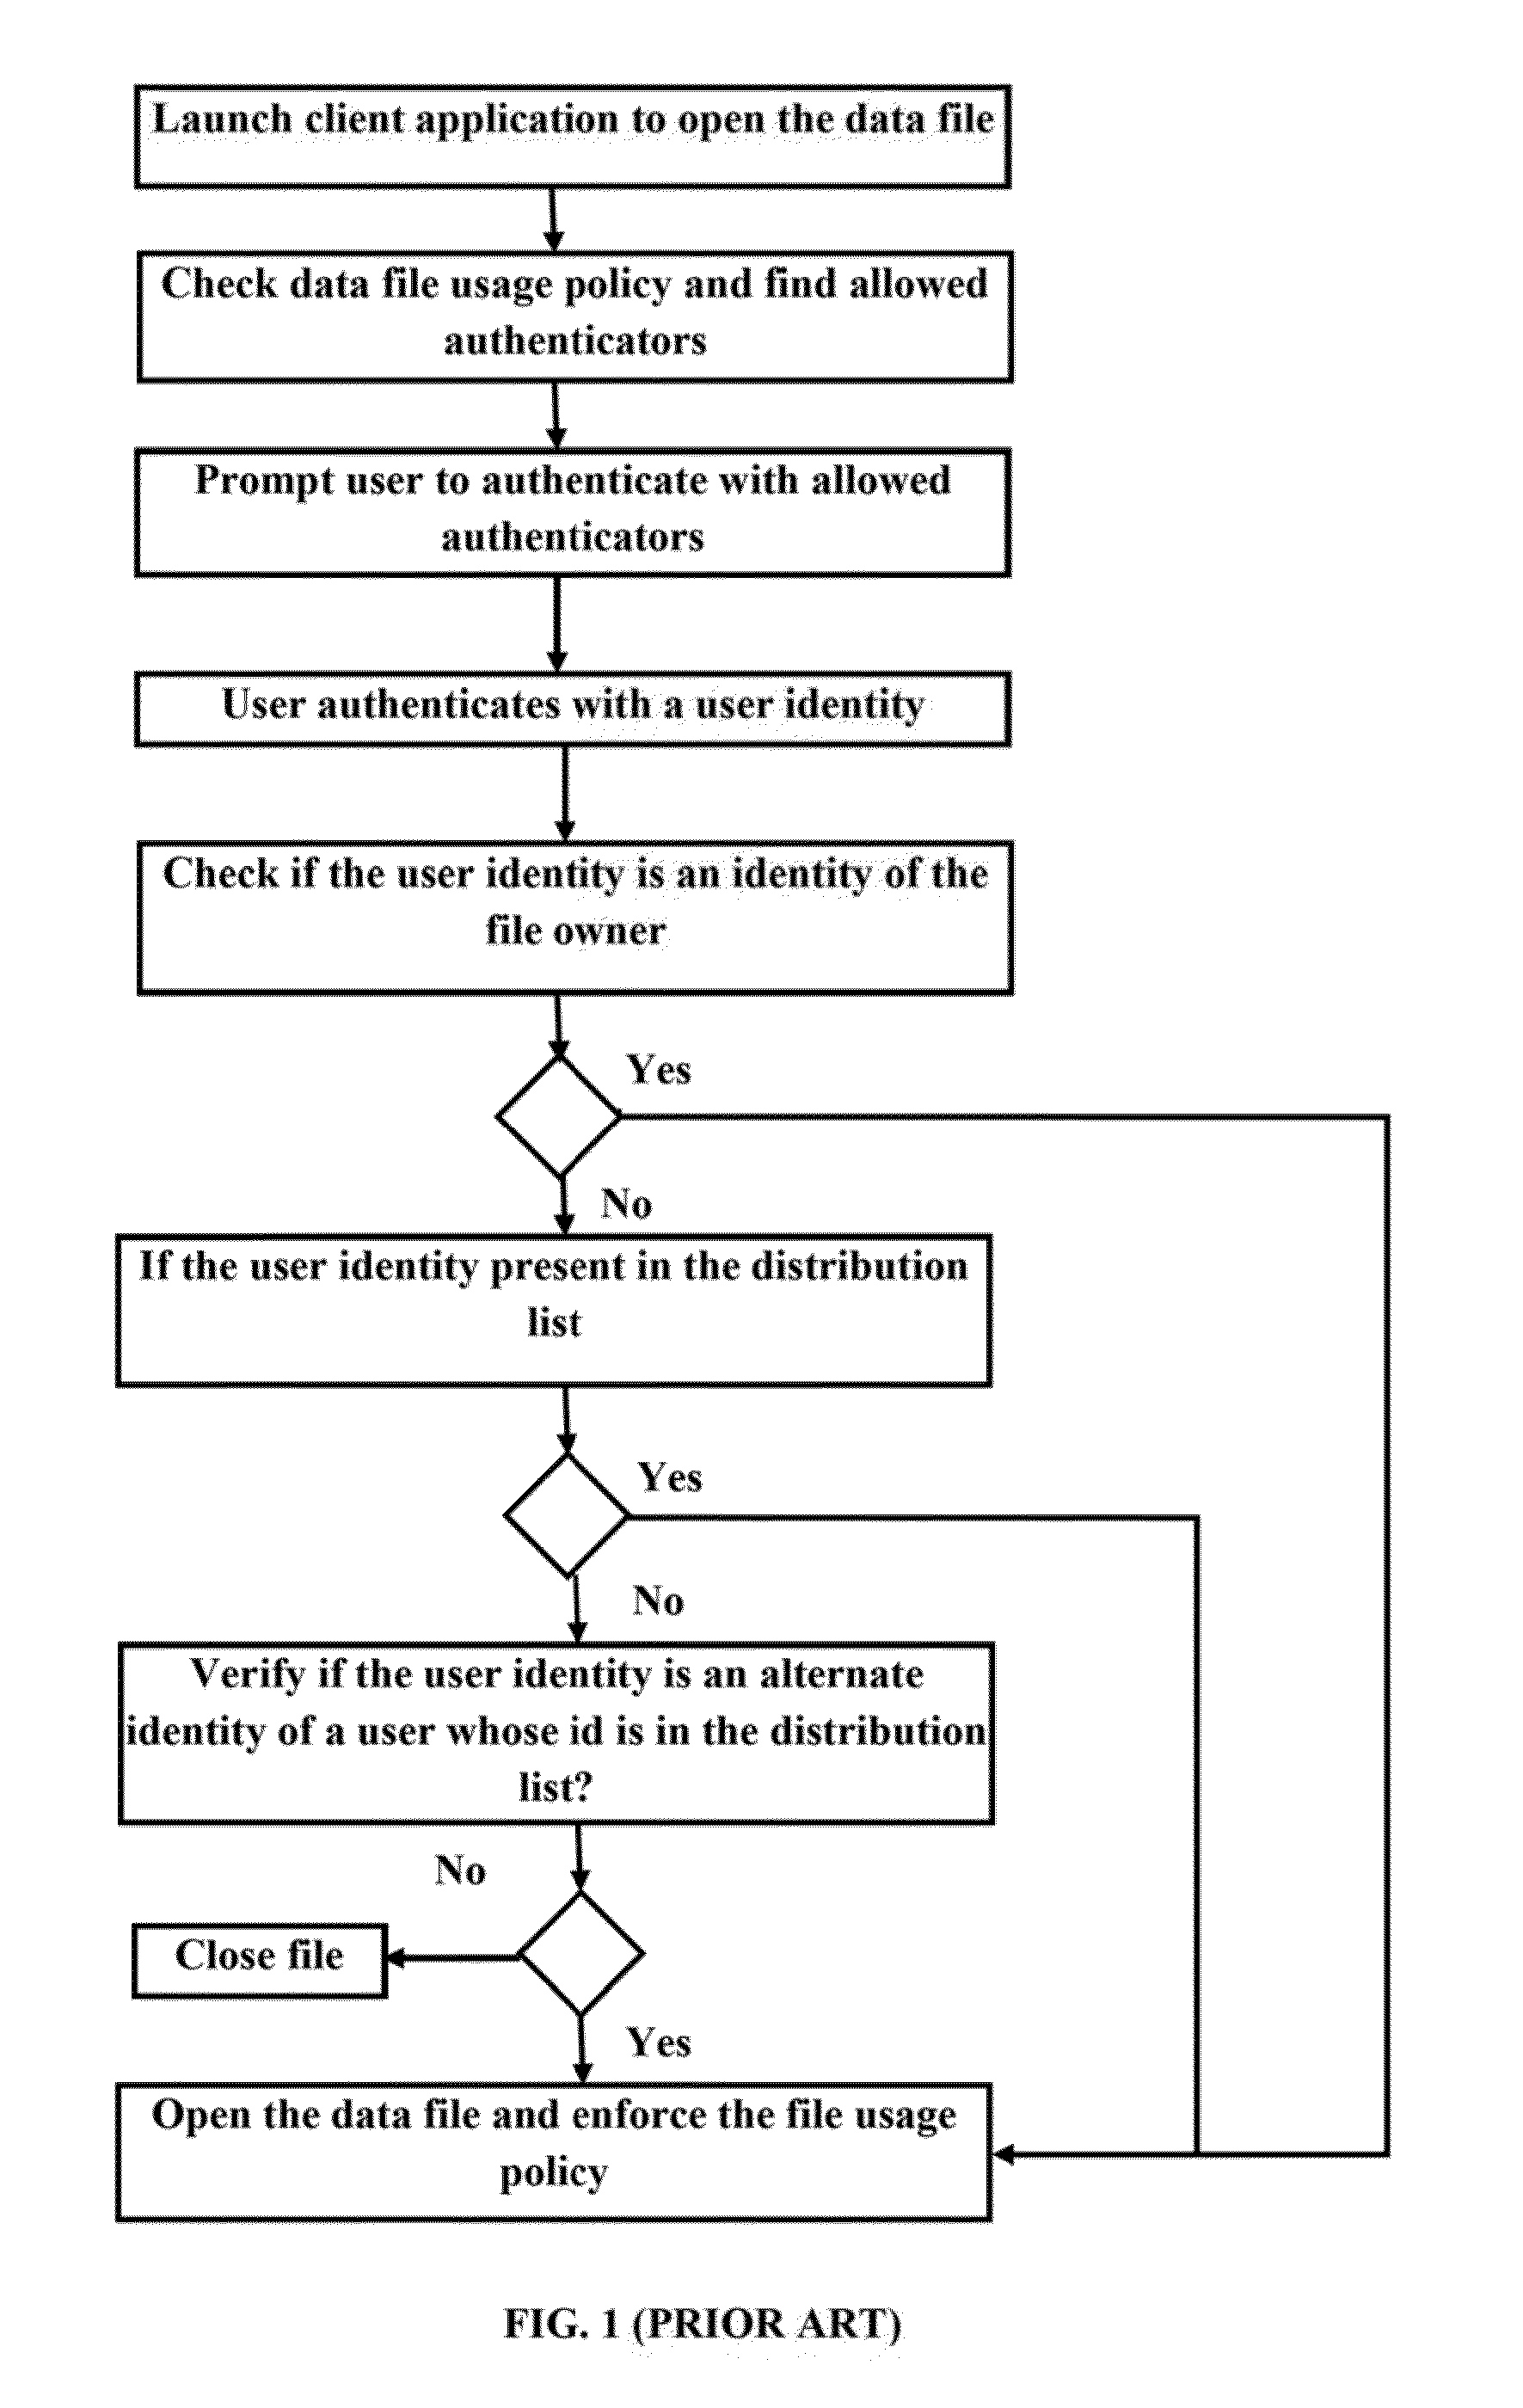 Method and system for providing access to encrypted data files for multiple federated authentication providers and verified identities